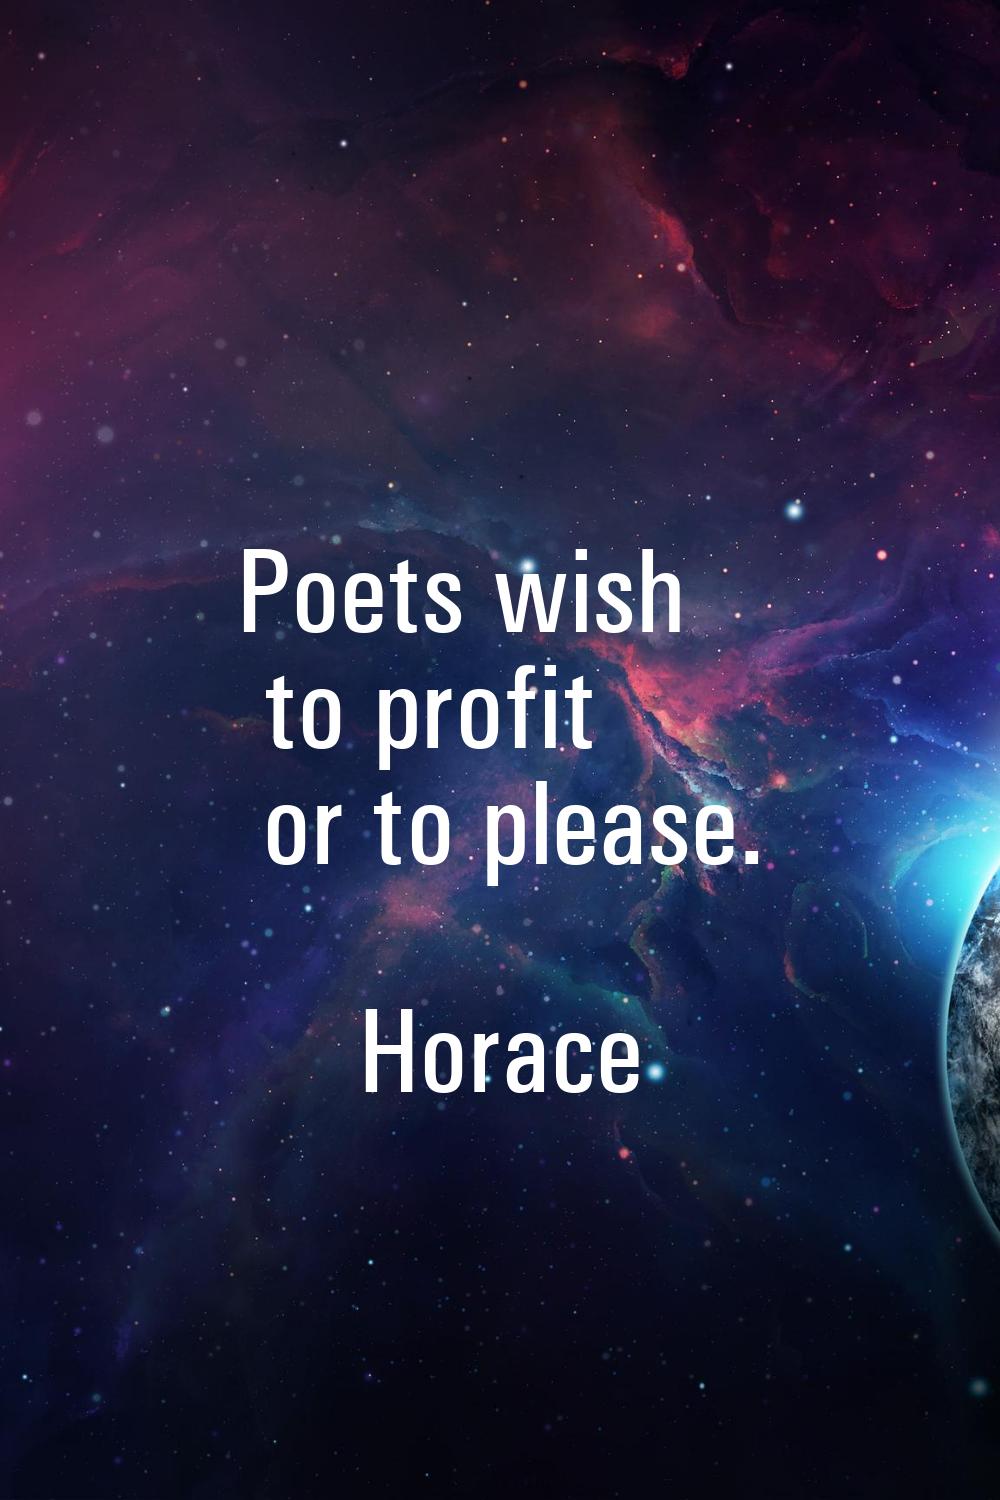 Poets wish to profit or to please.